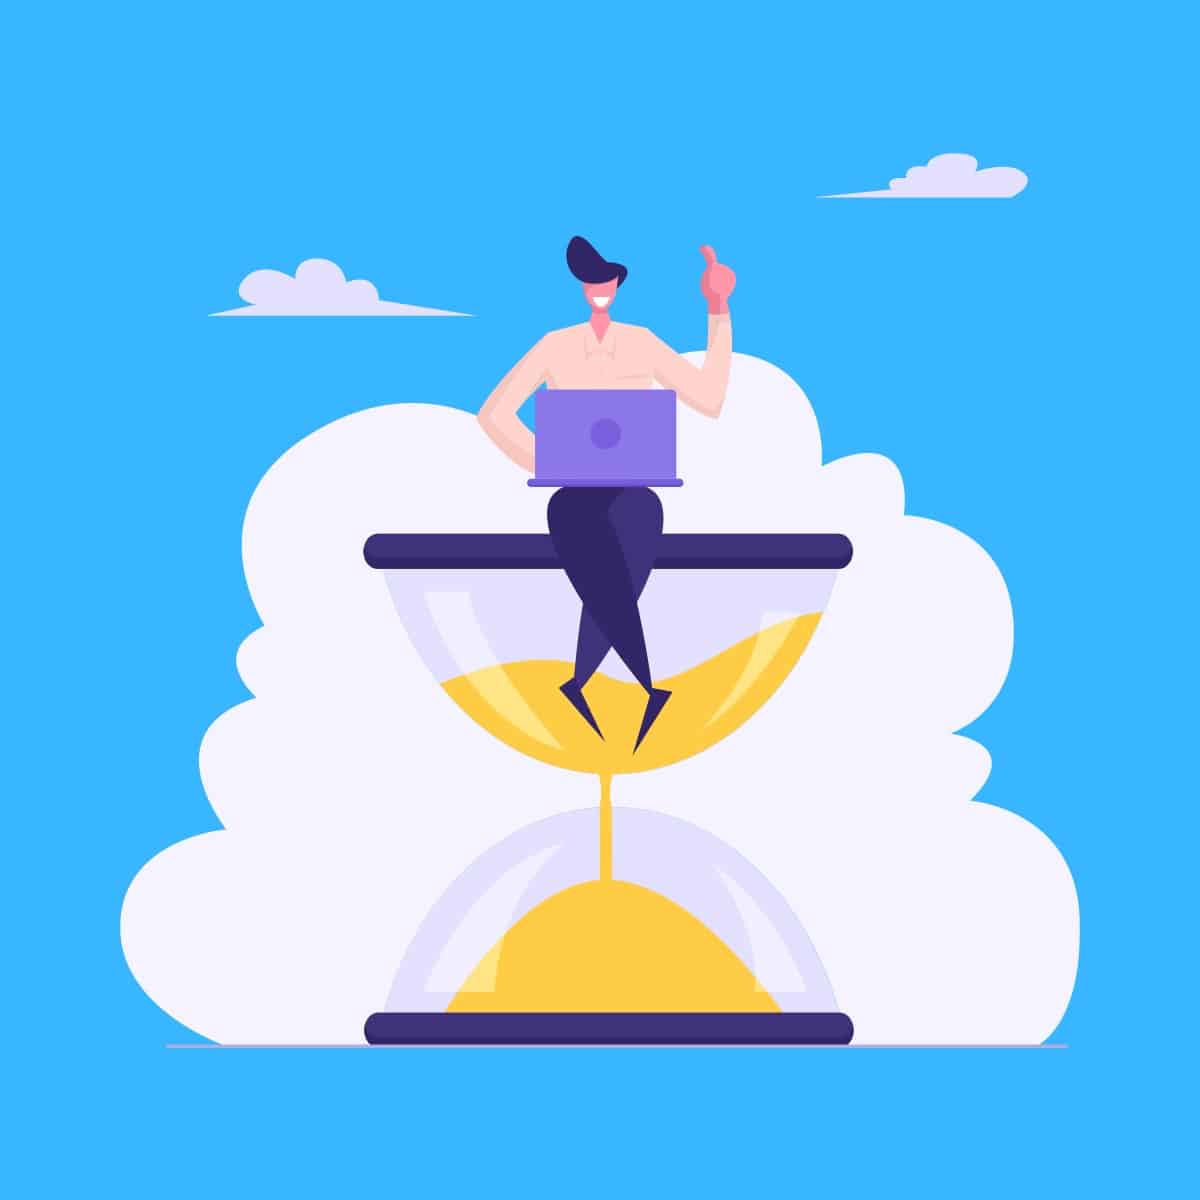 Cartoon graphic of a person on a laptop sitting on a giant hourglass counting time on a blue background.